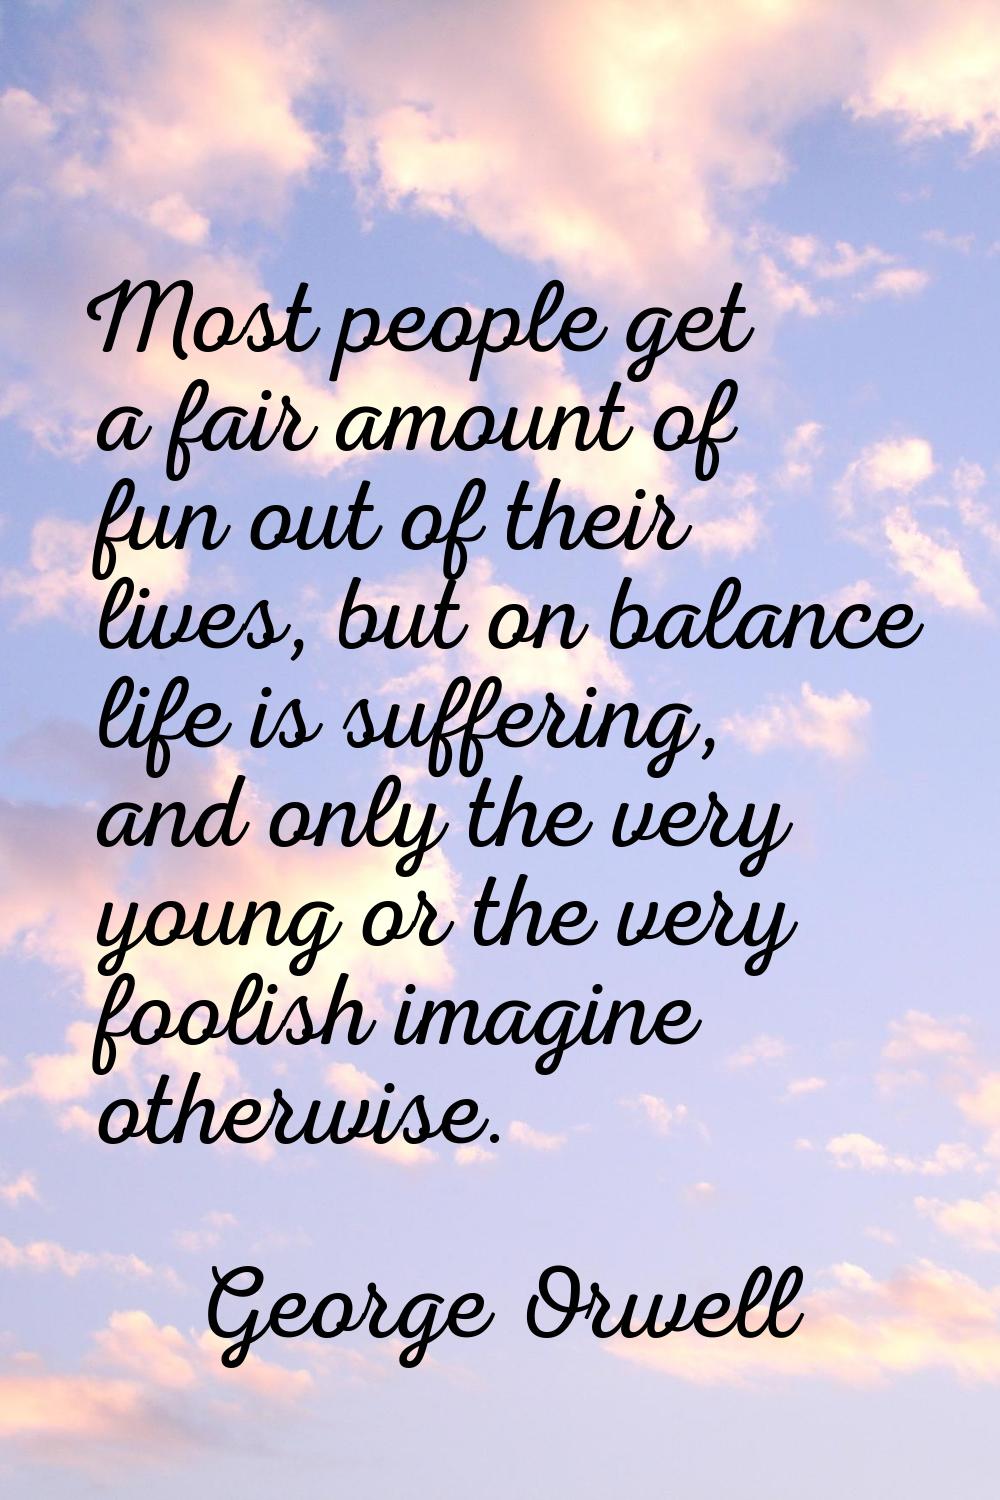 Most people get a fair amount of fun out of their lives, but on balance life is suffering, and only